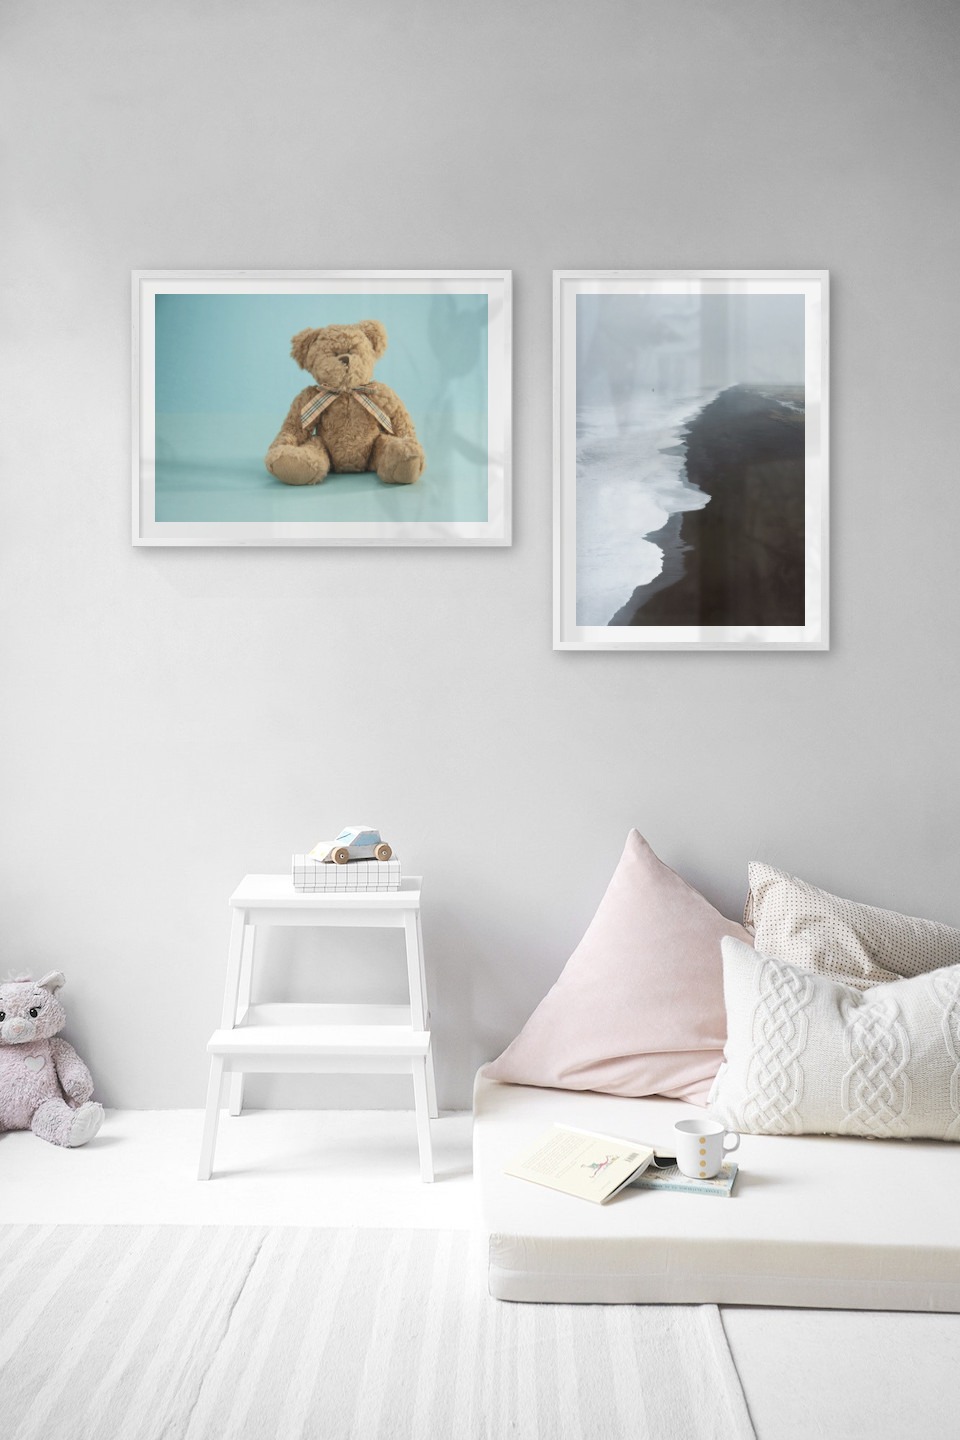 Gallery wall with picture frames in silver in sizes 50x70 with prints "Teddy bear and blue" and "Black beach"